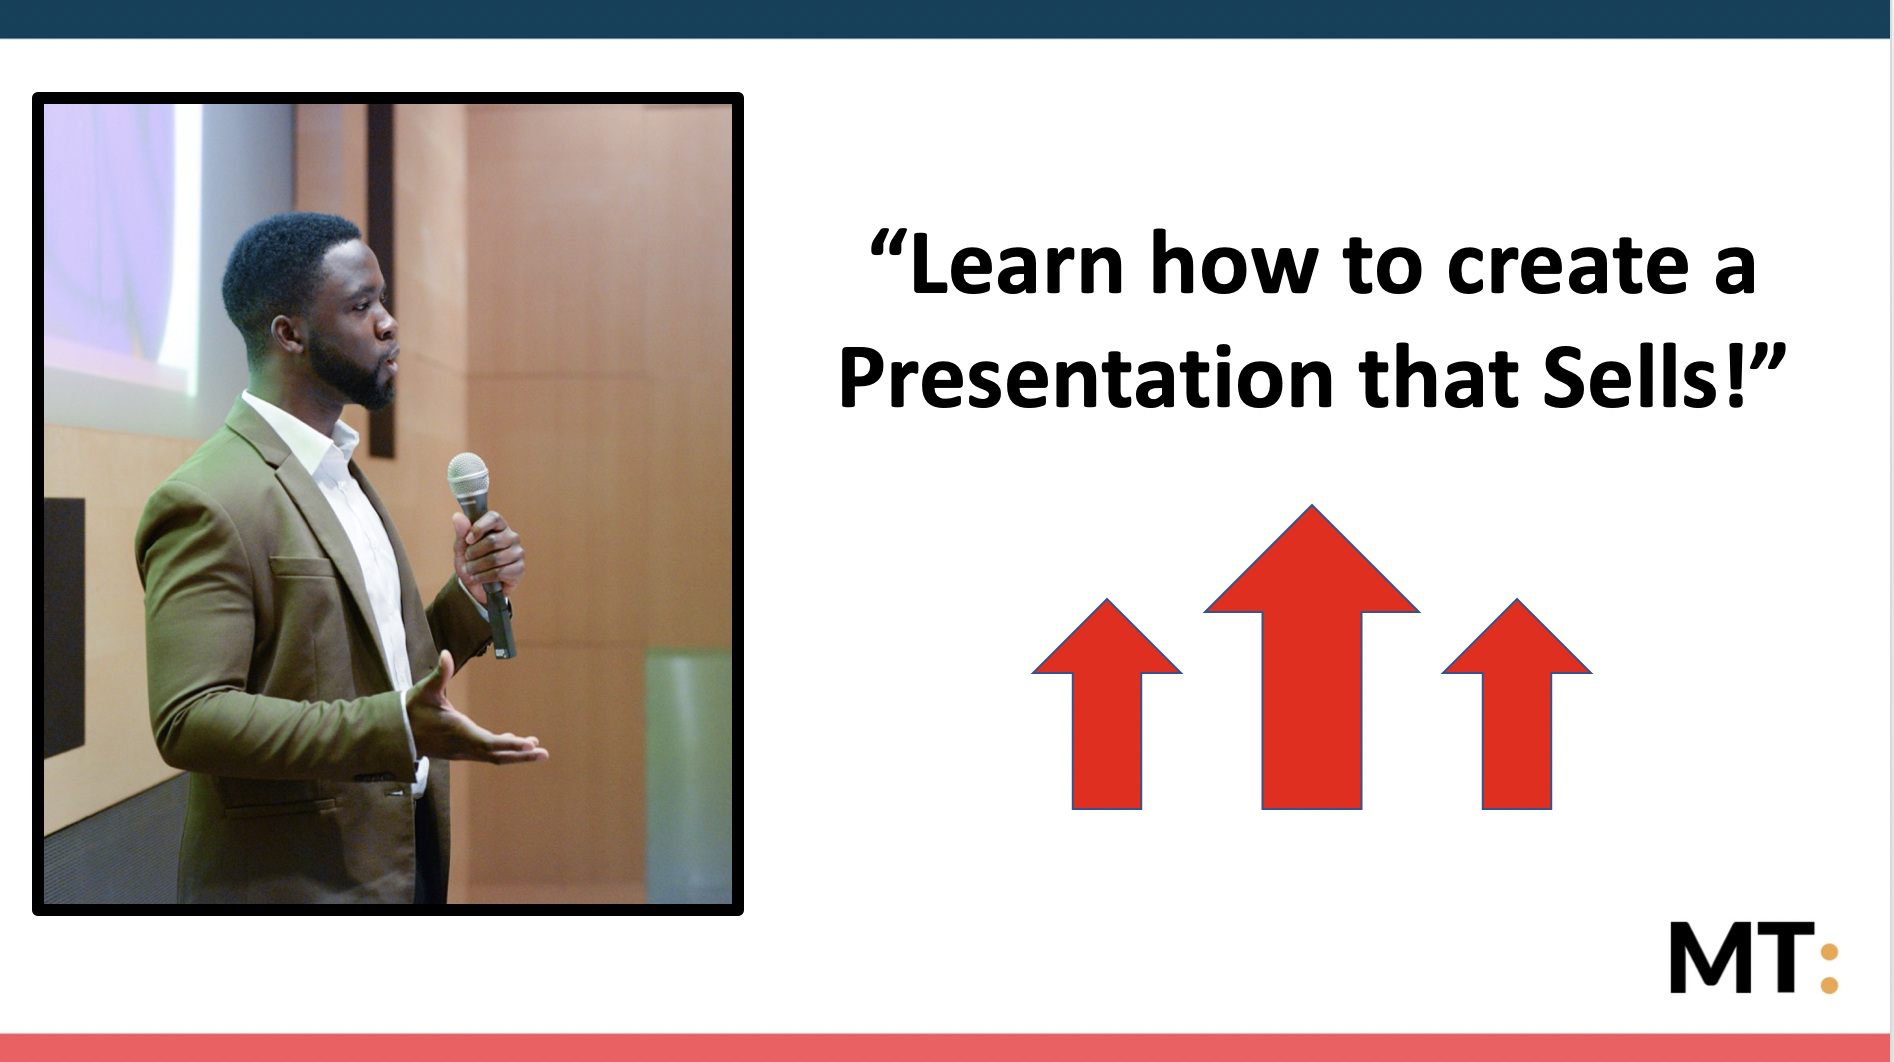 Learn-how-to-create a-presentation-that-sells